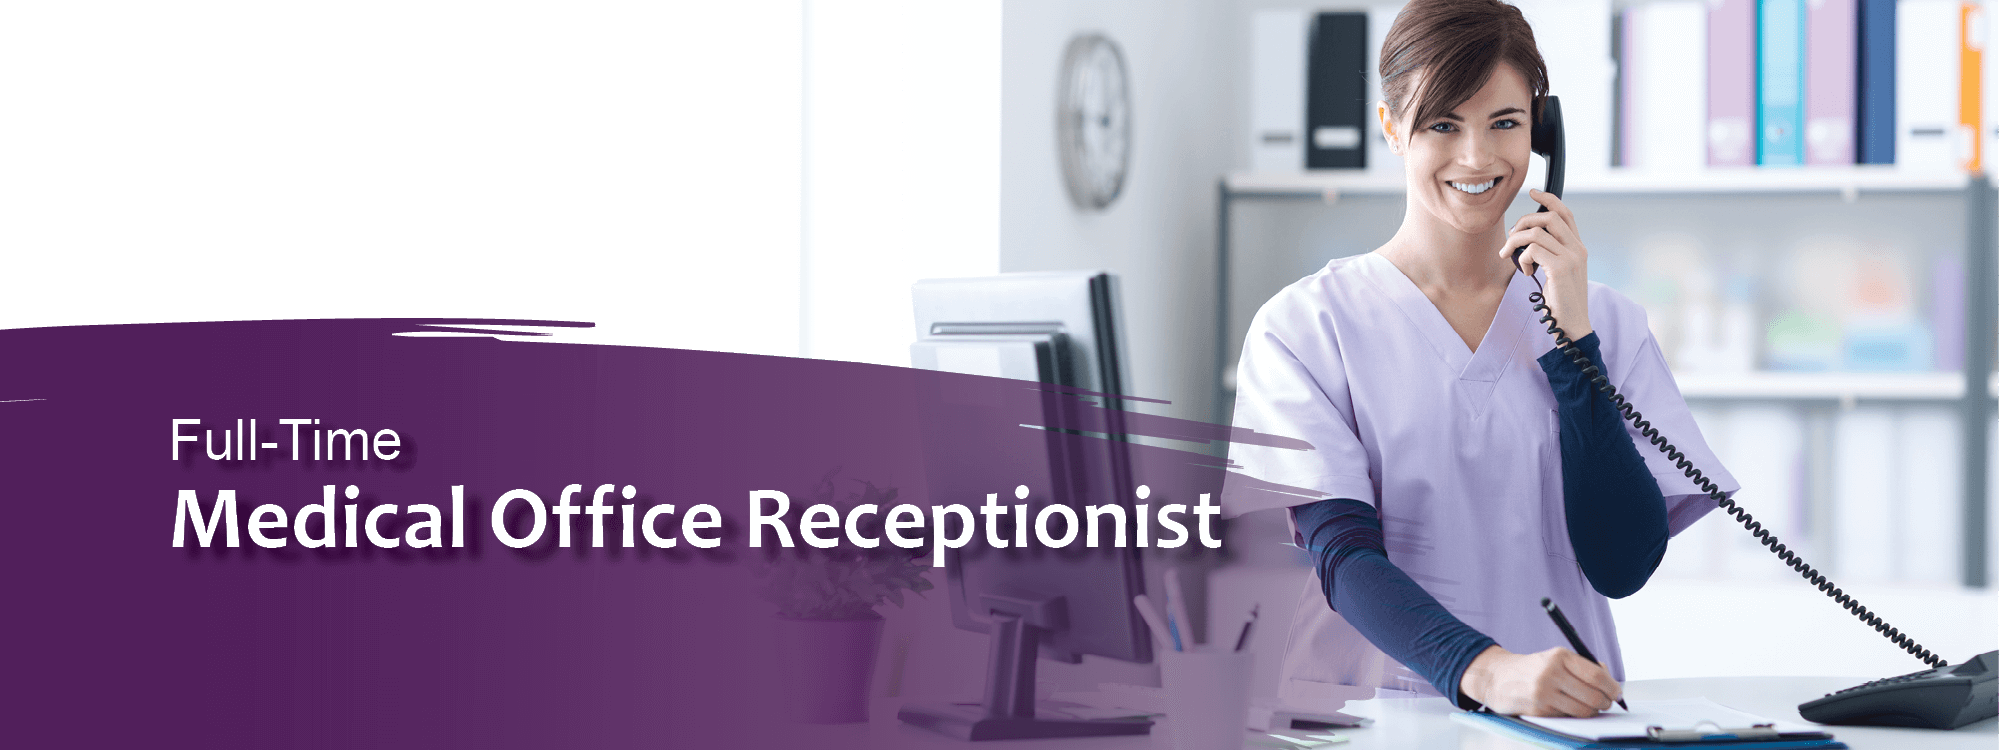 receptionist talking on the phone. image text: Full-time Medical Office Receptionist